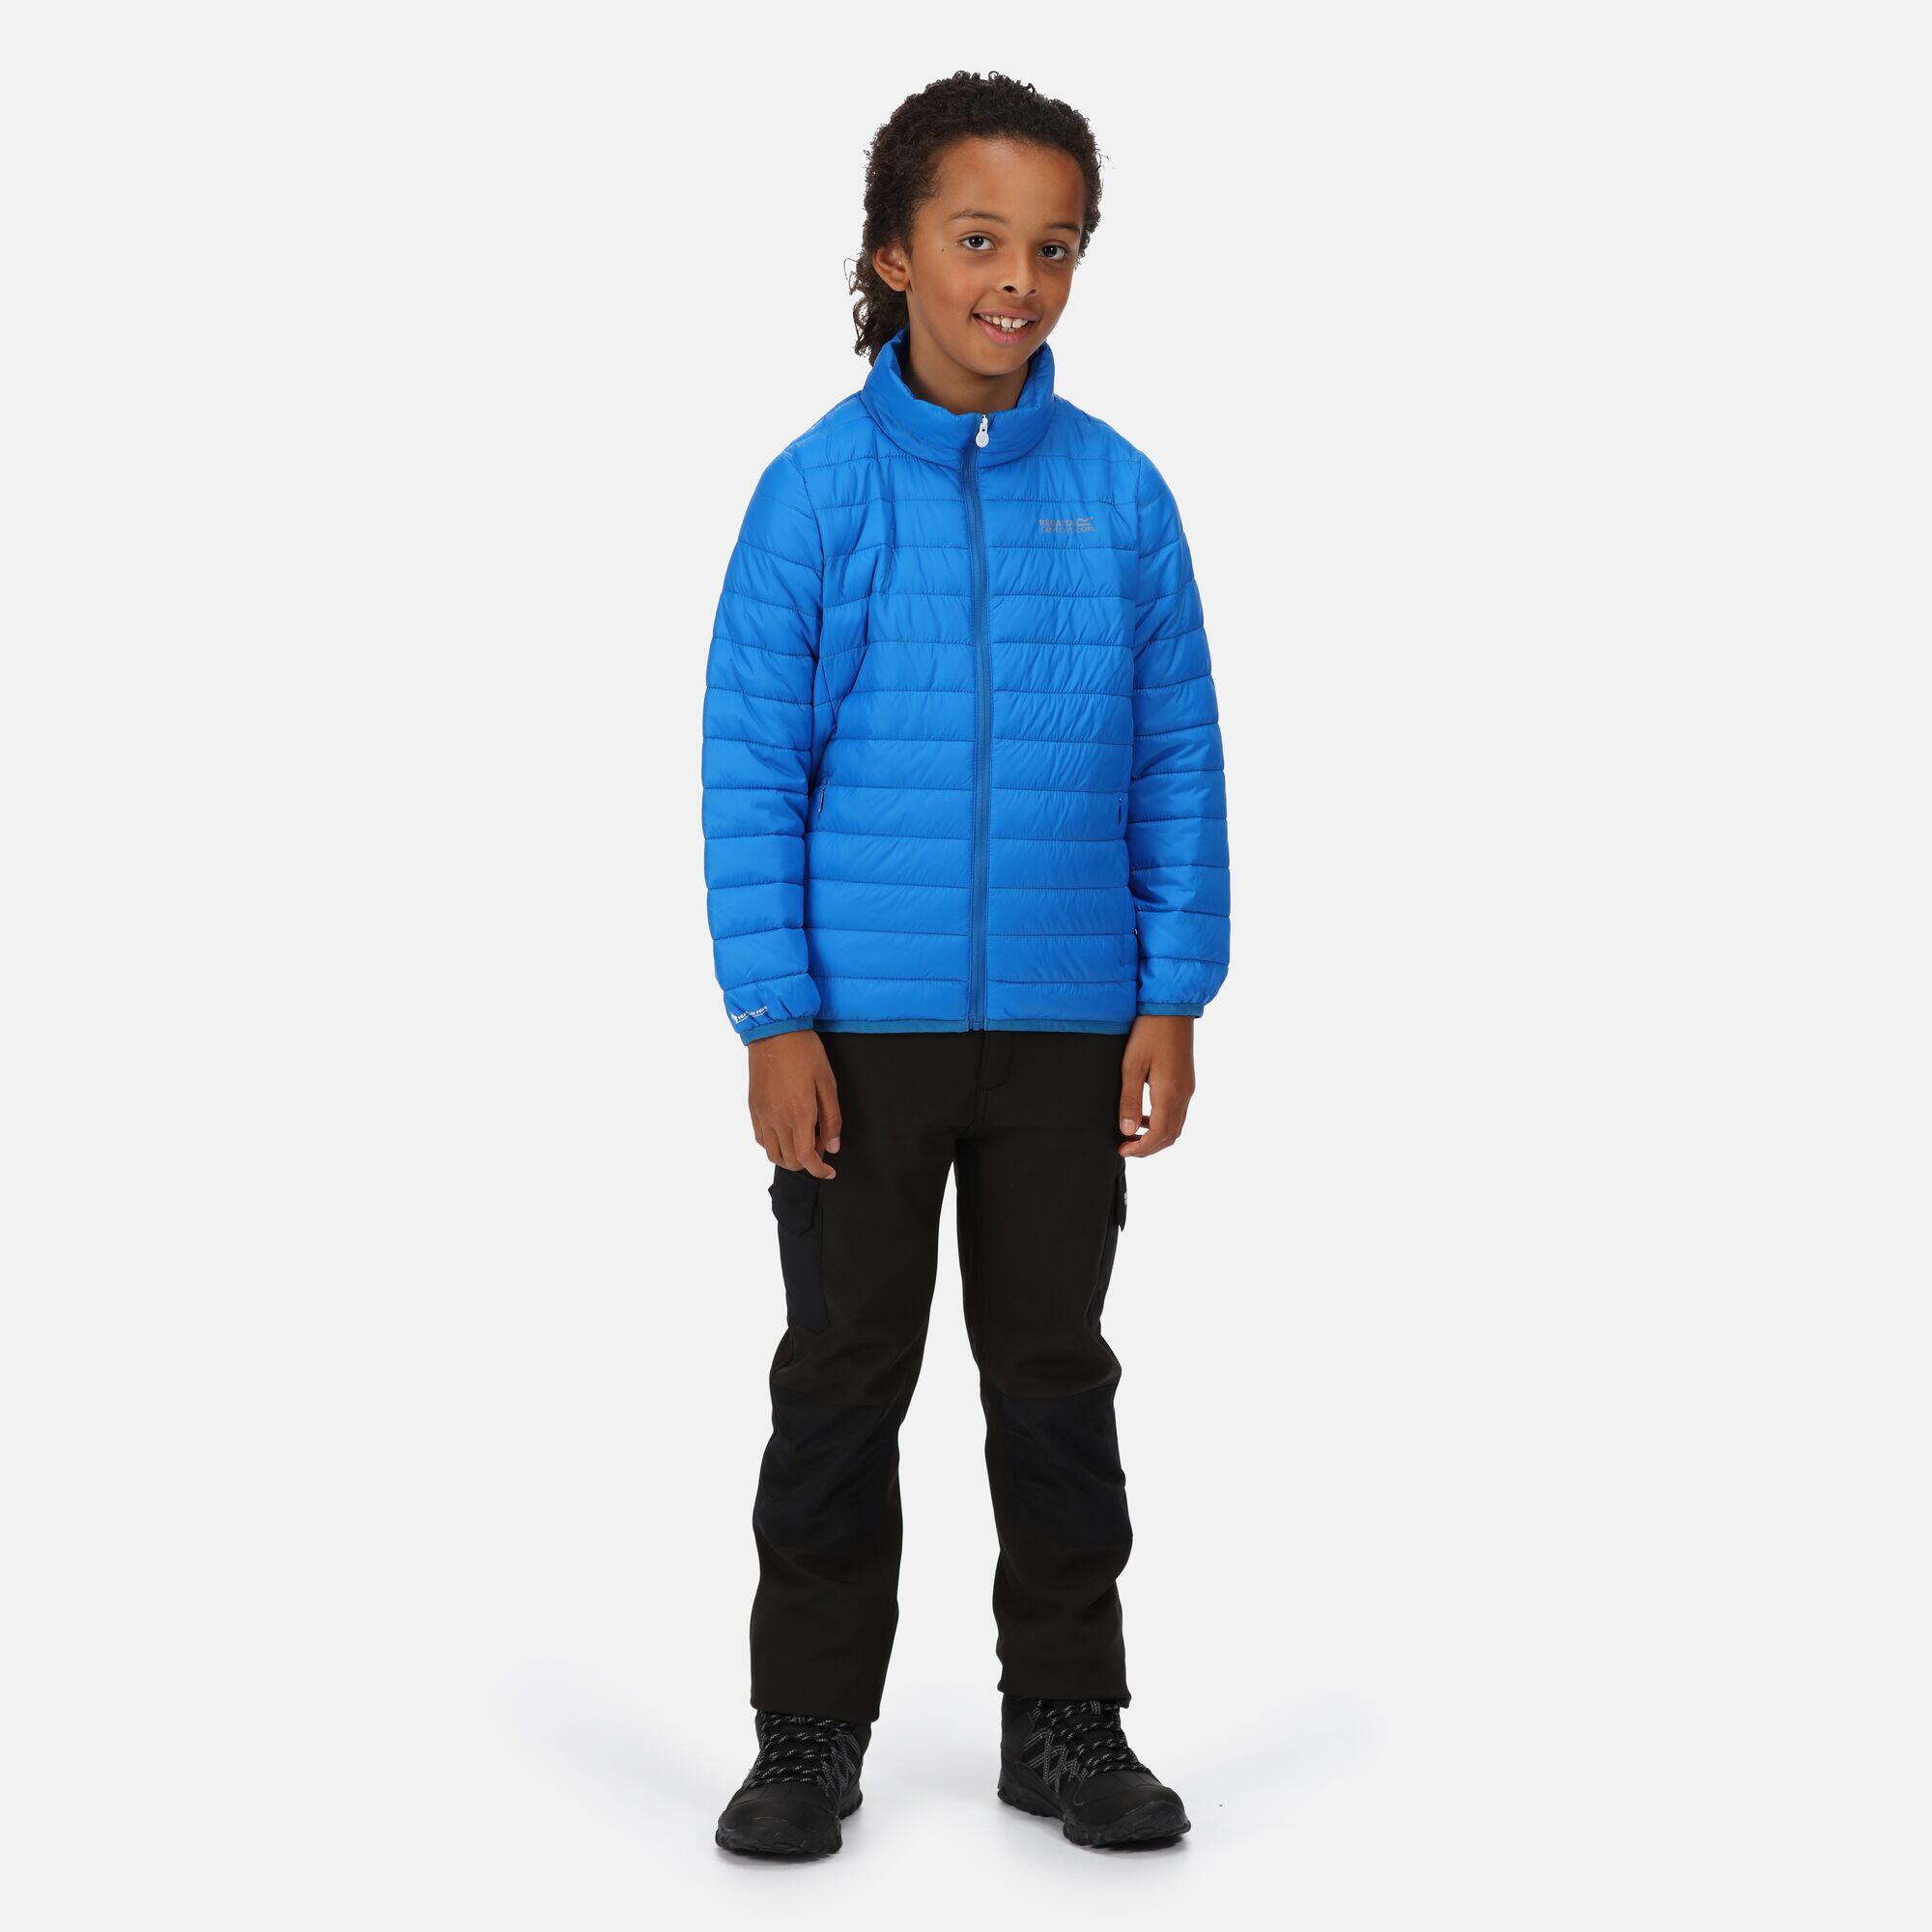 Hillpack Kids' Hiking Insulated Down Jacket - Bright Blue 3/5